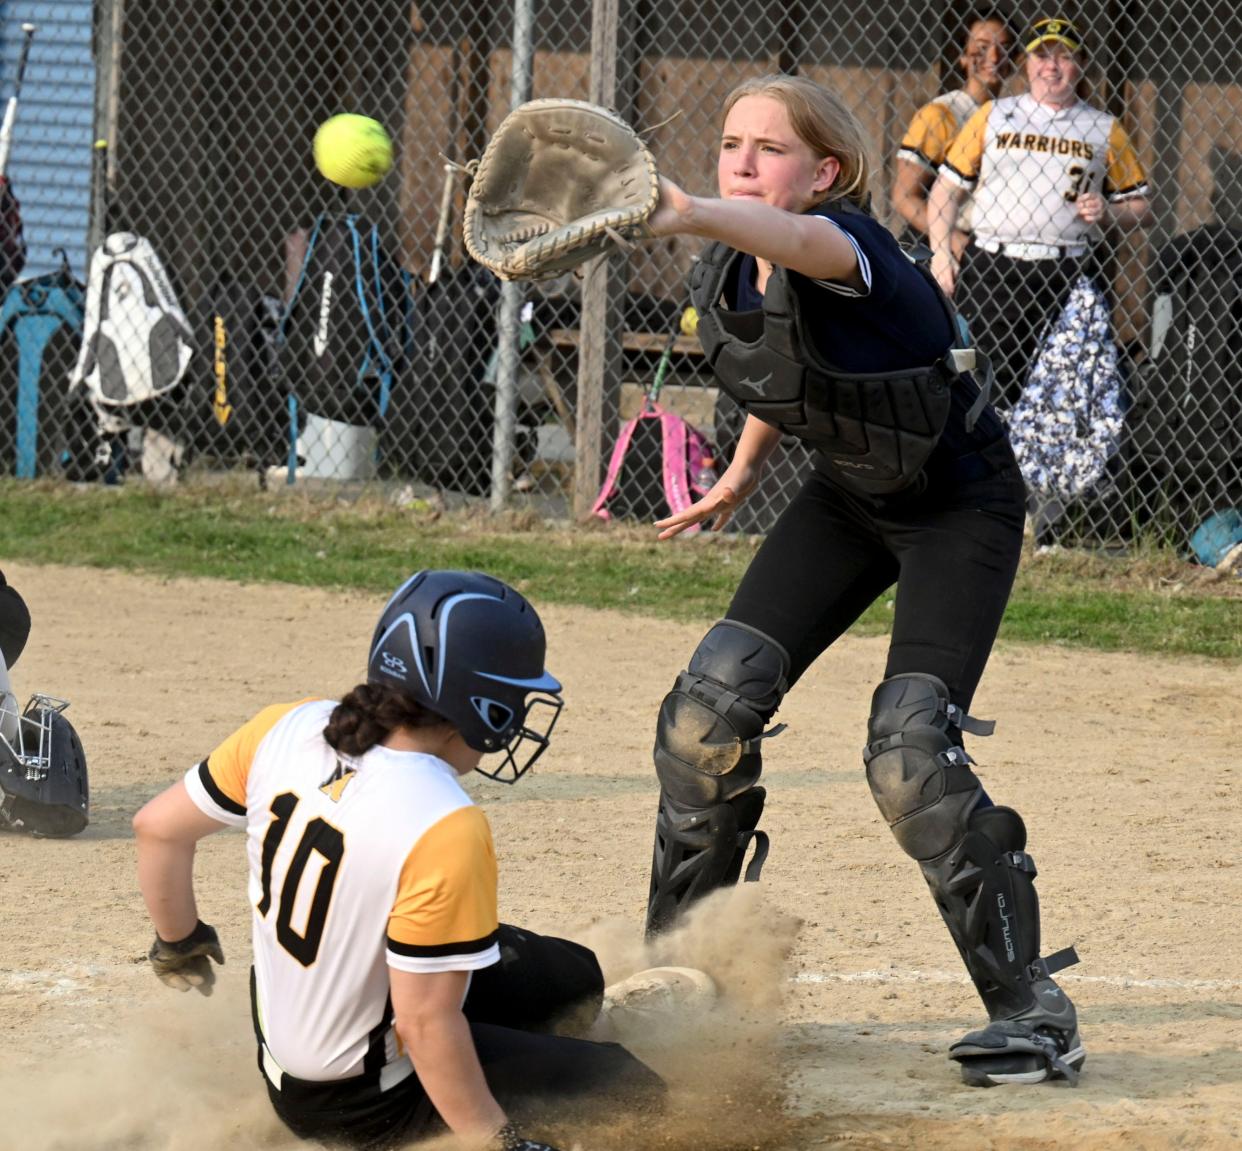 Jillian Parrott of Nauset arrives safely at home ahead of the throw to Sturgis catcher Ryley Mayo of Sturgis.